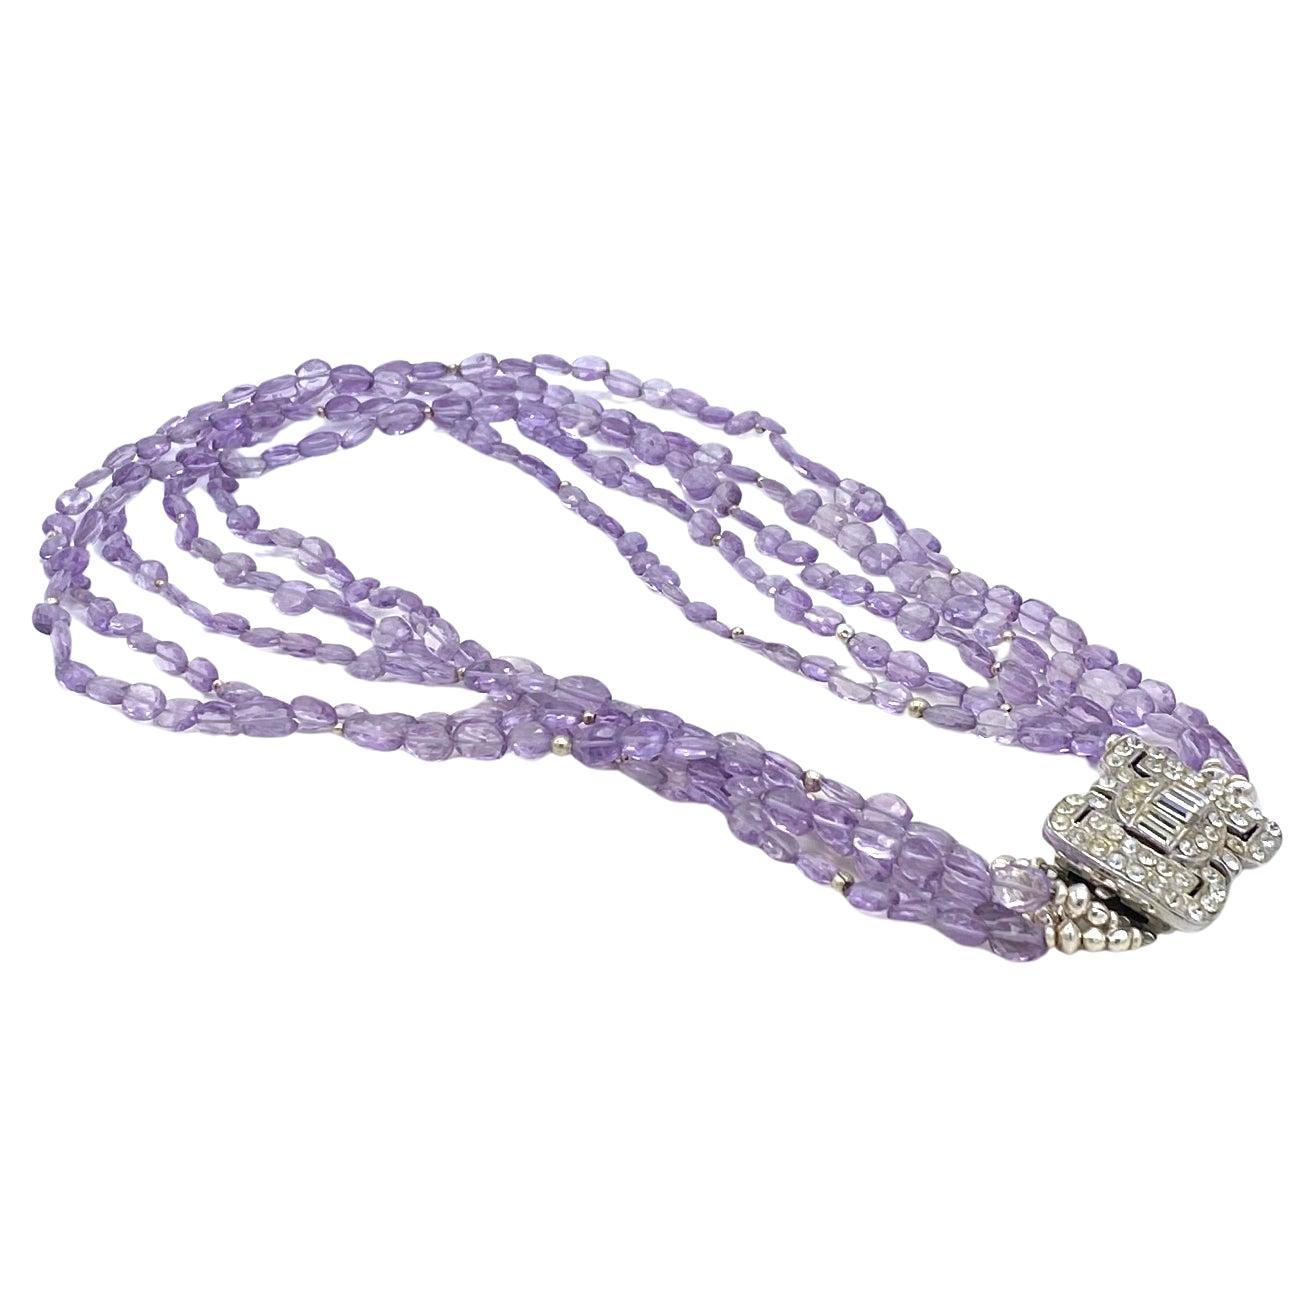 Bead Five Strand Translucent Amethyst Necklace with Art Deco Clasp For Sale